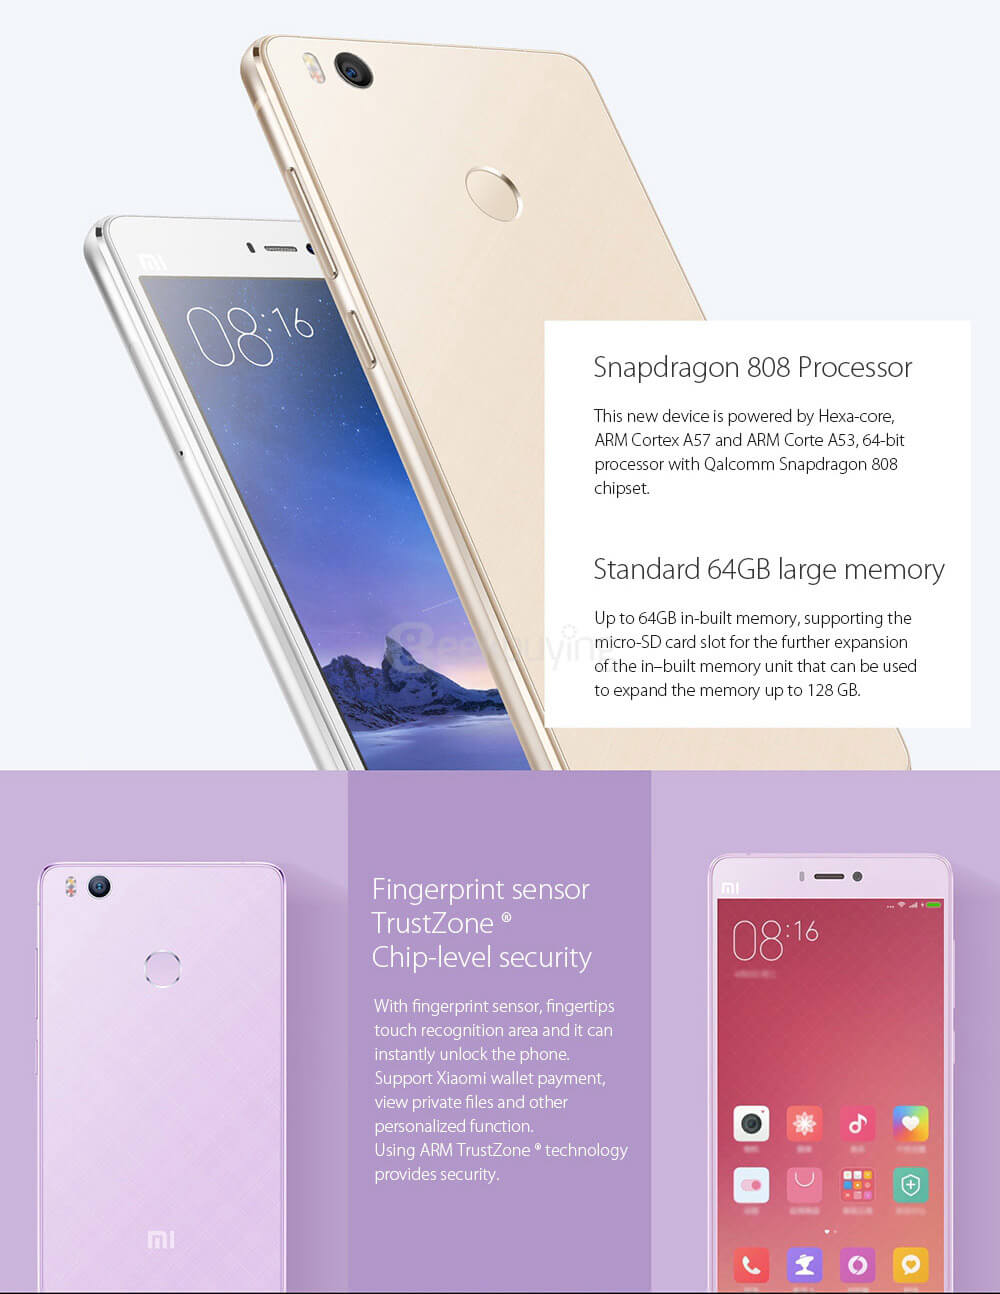 Xiaomi Mi4S /Mi 4S 4G LTE 5.0inch FHD MIUI 7.2 OS 3GB 64GB Smartphone 64-bit Snapdragon 808 Hexa Core 13.0MP Touch ID Type-C QC2.0 - Gold